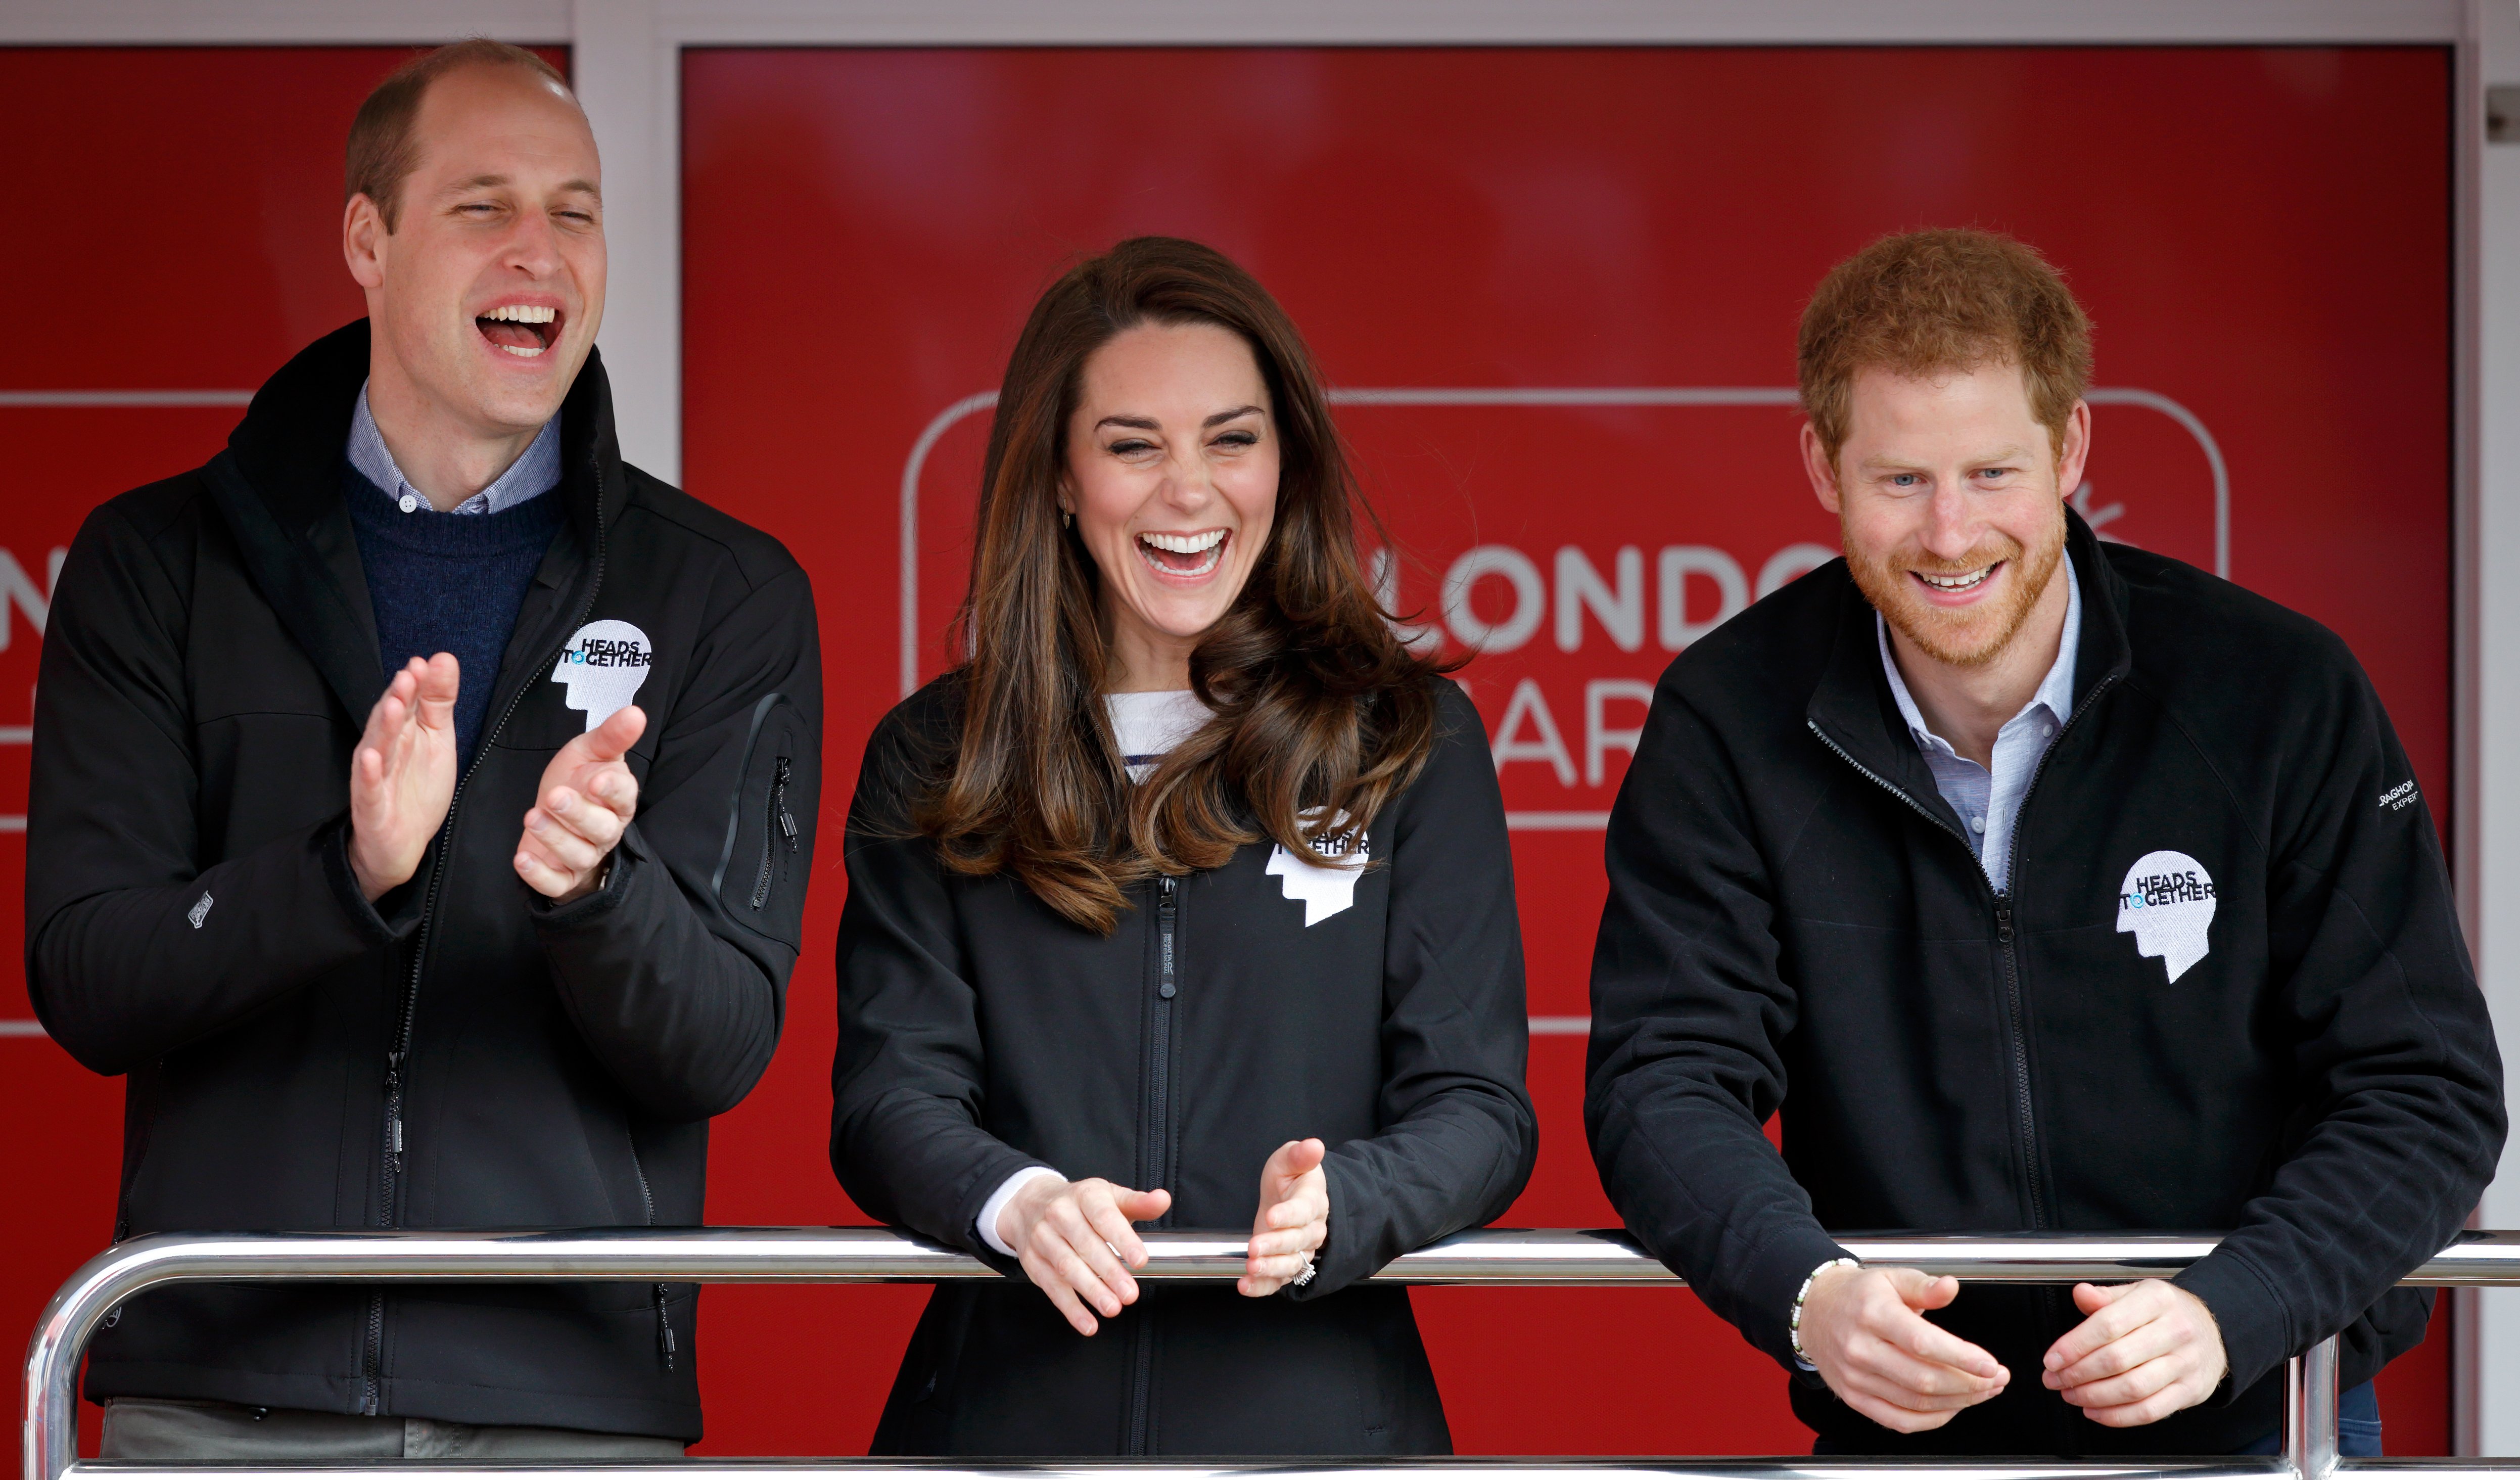 Prince William, Duke of Cambridge, Catherine, Duchess of Cambridge and Prince Harry cheer on runners as they start the 2017 Virgin Money London Marathon on April 23, 2017 in London, England. | Source: Getty Images